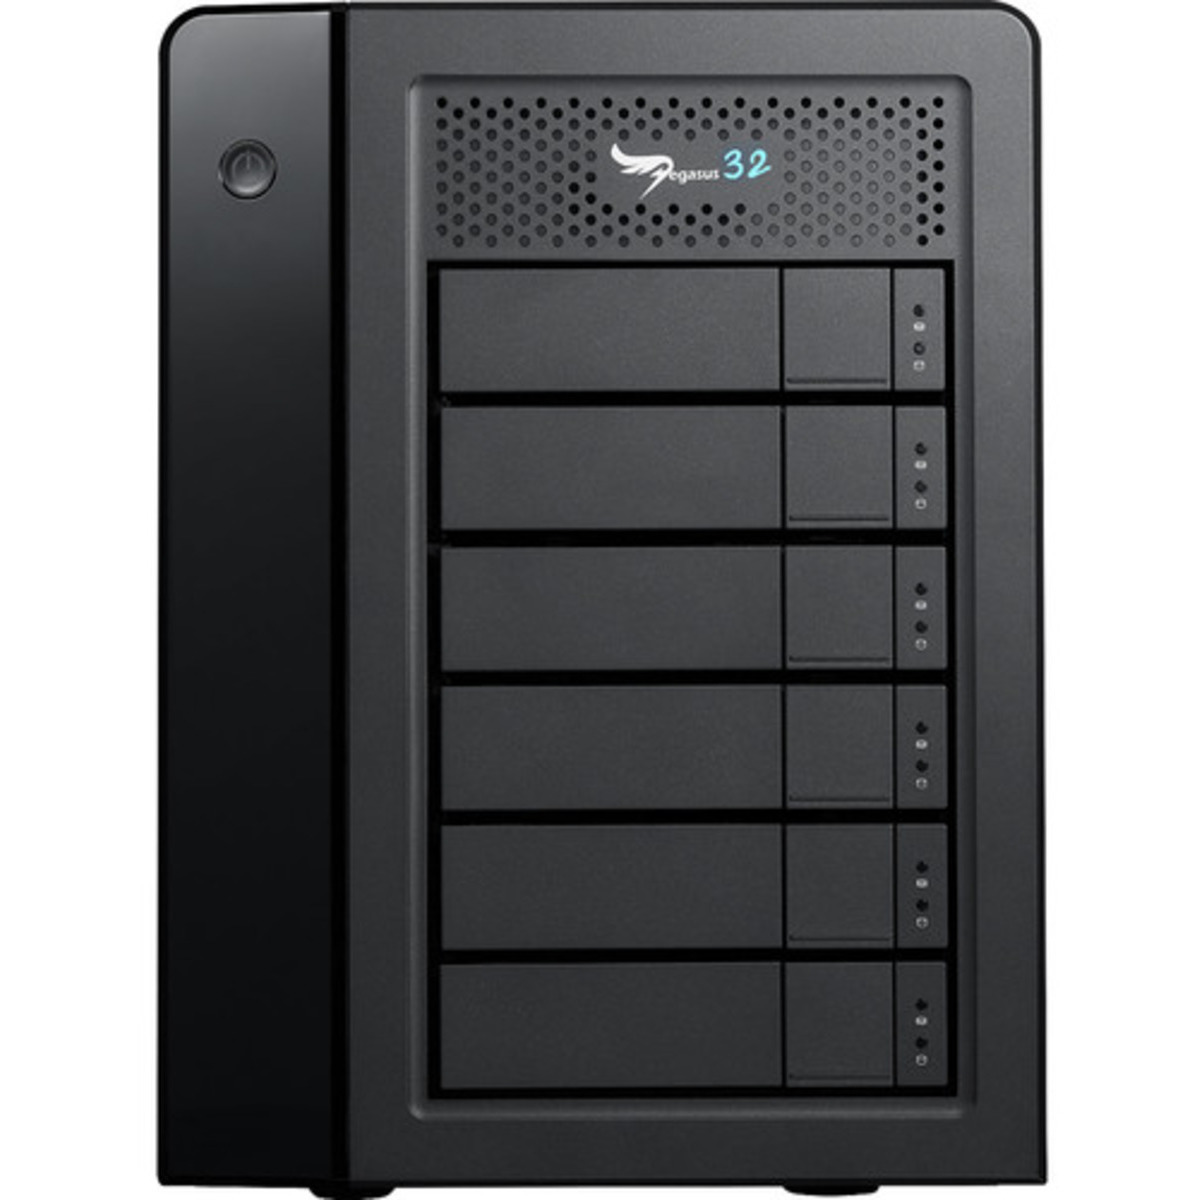 Promise Technology Pegasus32 R6 Thunderbolt 3 80tb 6-Bay Desktop Multimedia / Power User / Business DAS - Direct Attached Storage Device 4x20tb Seagate IronWolf Pro ST20000NT001 3.5 7200rpm SATA 6Gb/s HDD NAS Class Drives Installed - Burn-In Tested Pegasus32 R6 Thunderbolt 3